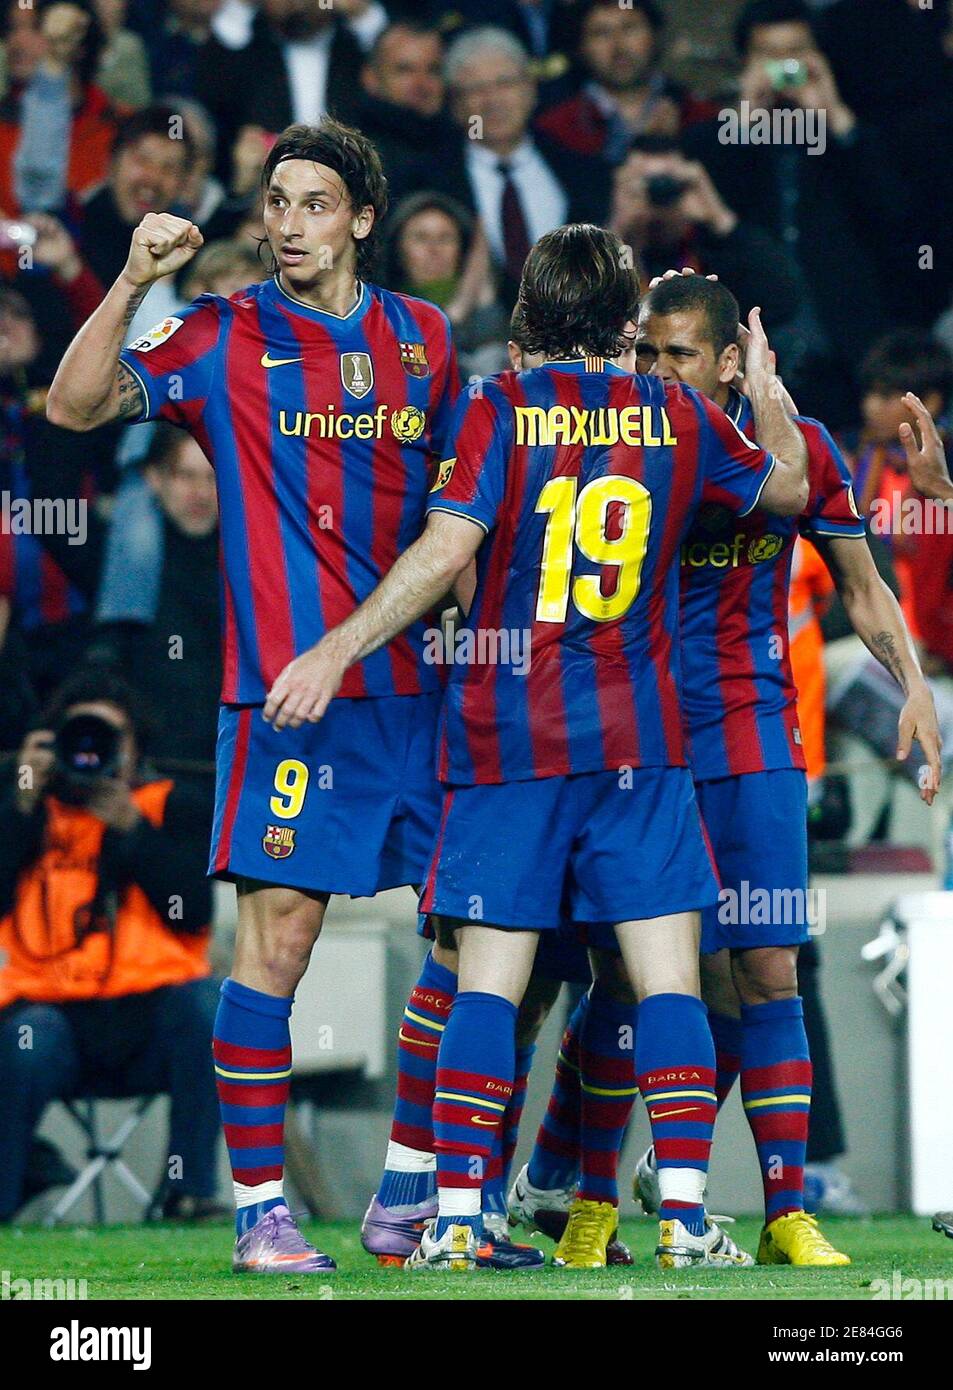 Barcelona's Zlatan Ibrahimovic, Maxwell (C) and Daniel Alves (R) celebrate  a goal against Osasuna during their Spanish first division soccer match at  Camp Nou stadium in Barcelona, March 24, 2010. REUTERS/Albert Gea (